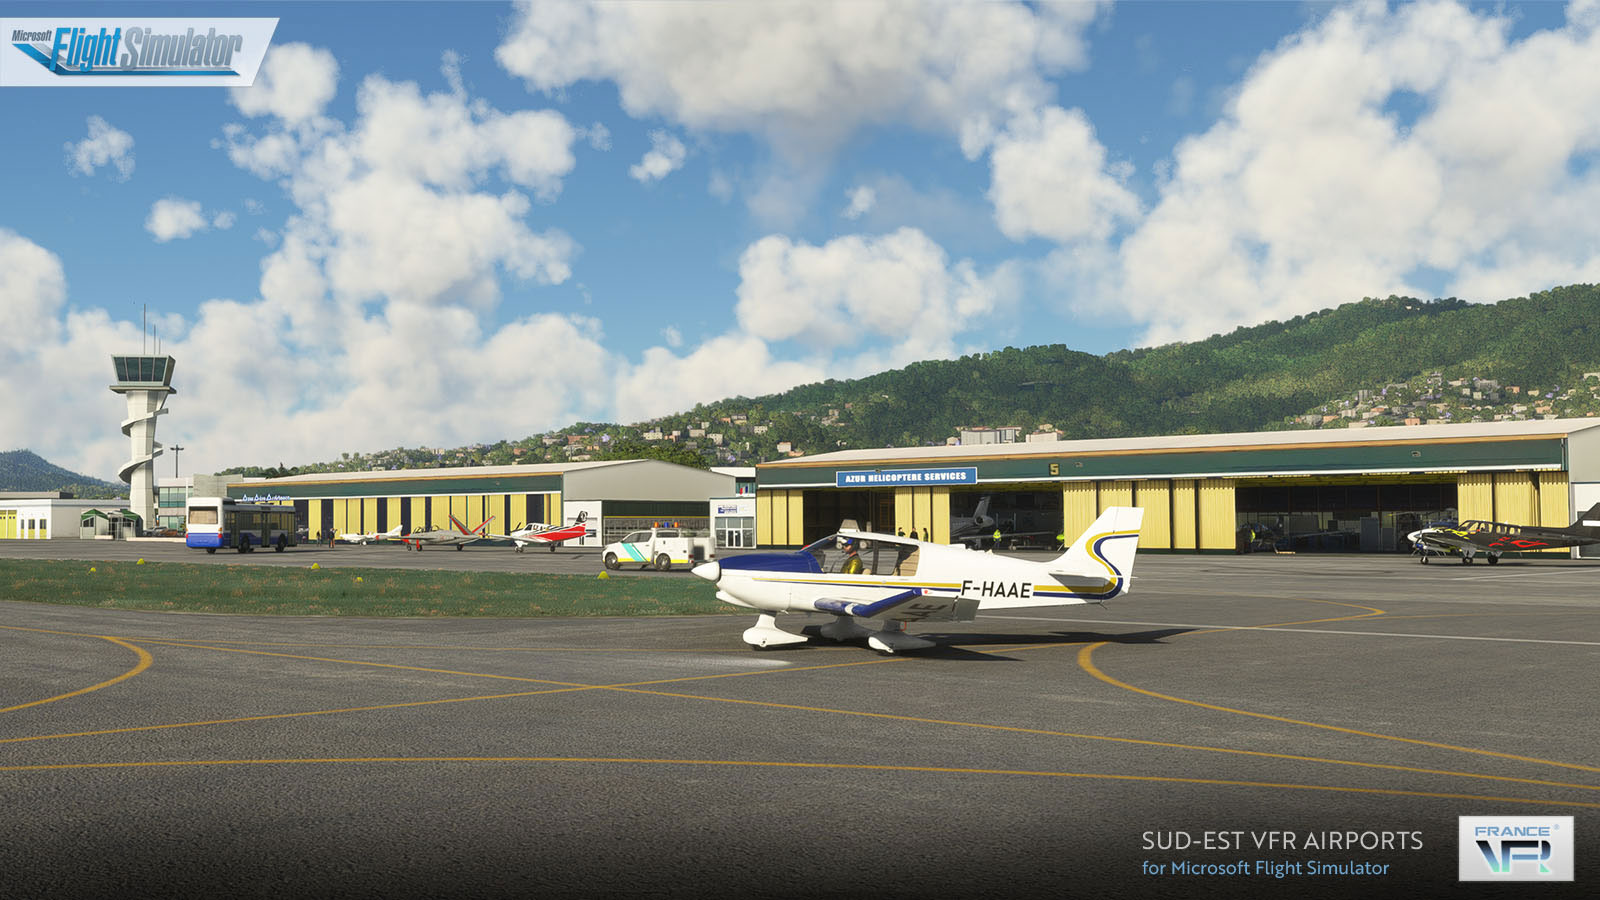 France VFR - South-East VFR Airports MSFS